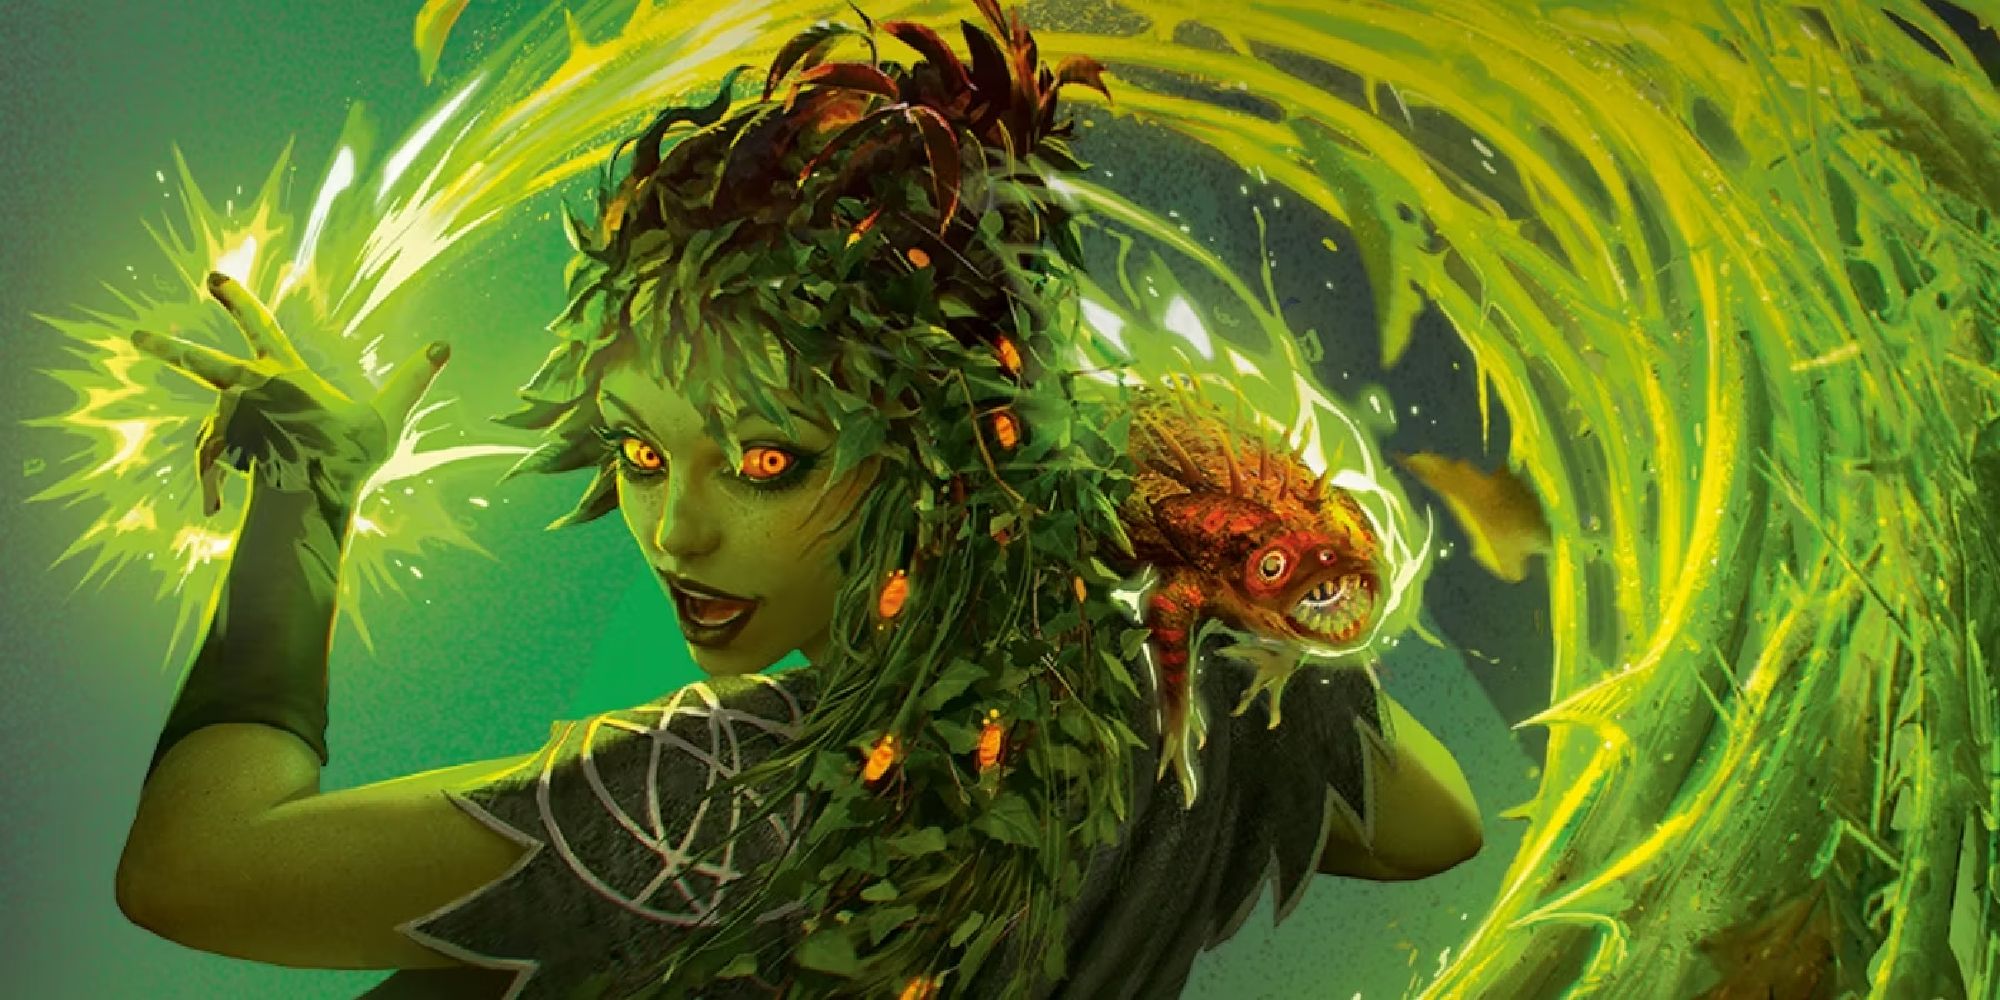 A woman with green skin and plant-like hair casts a spell of green energy.